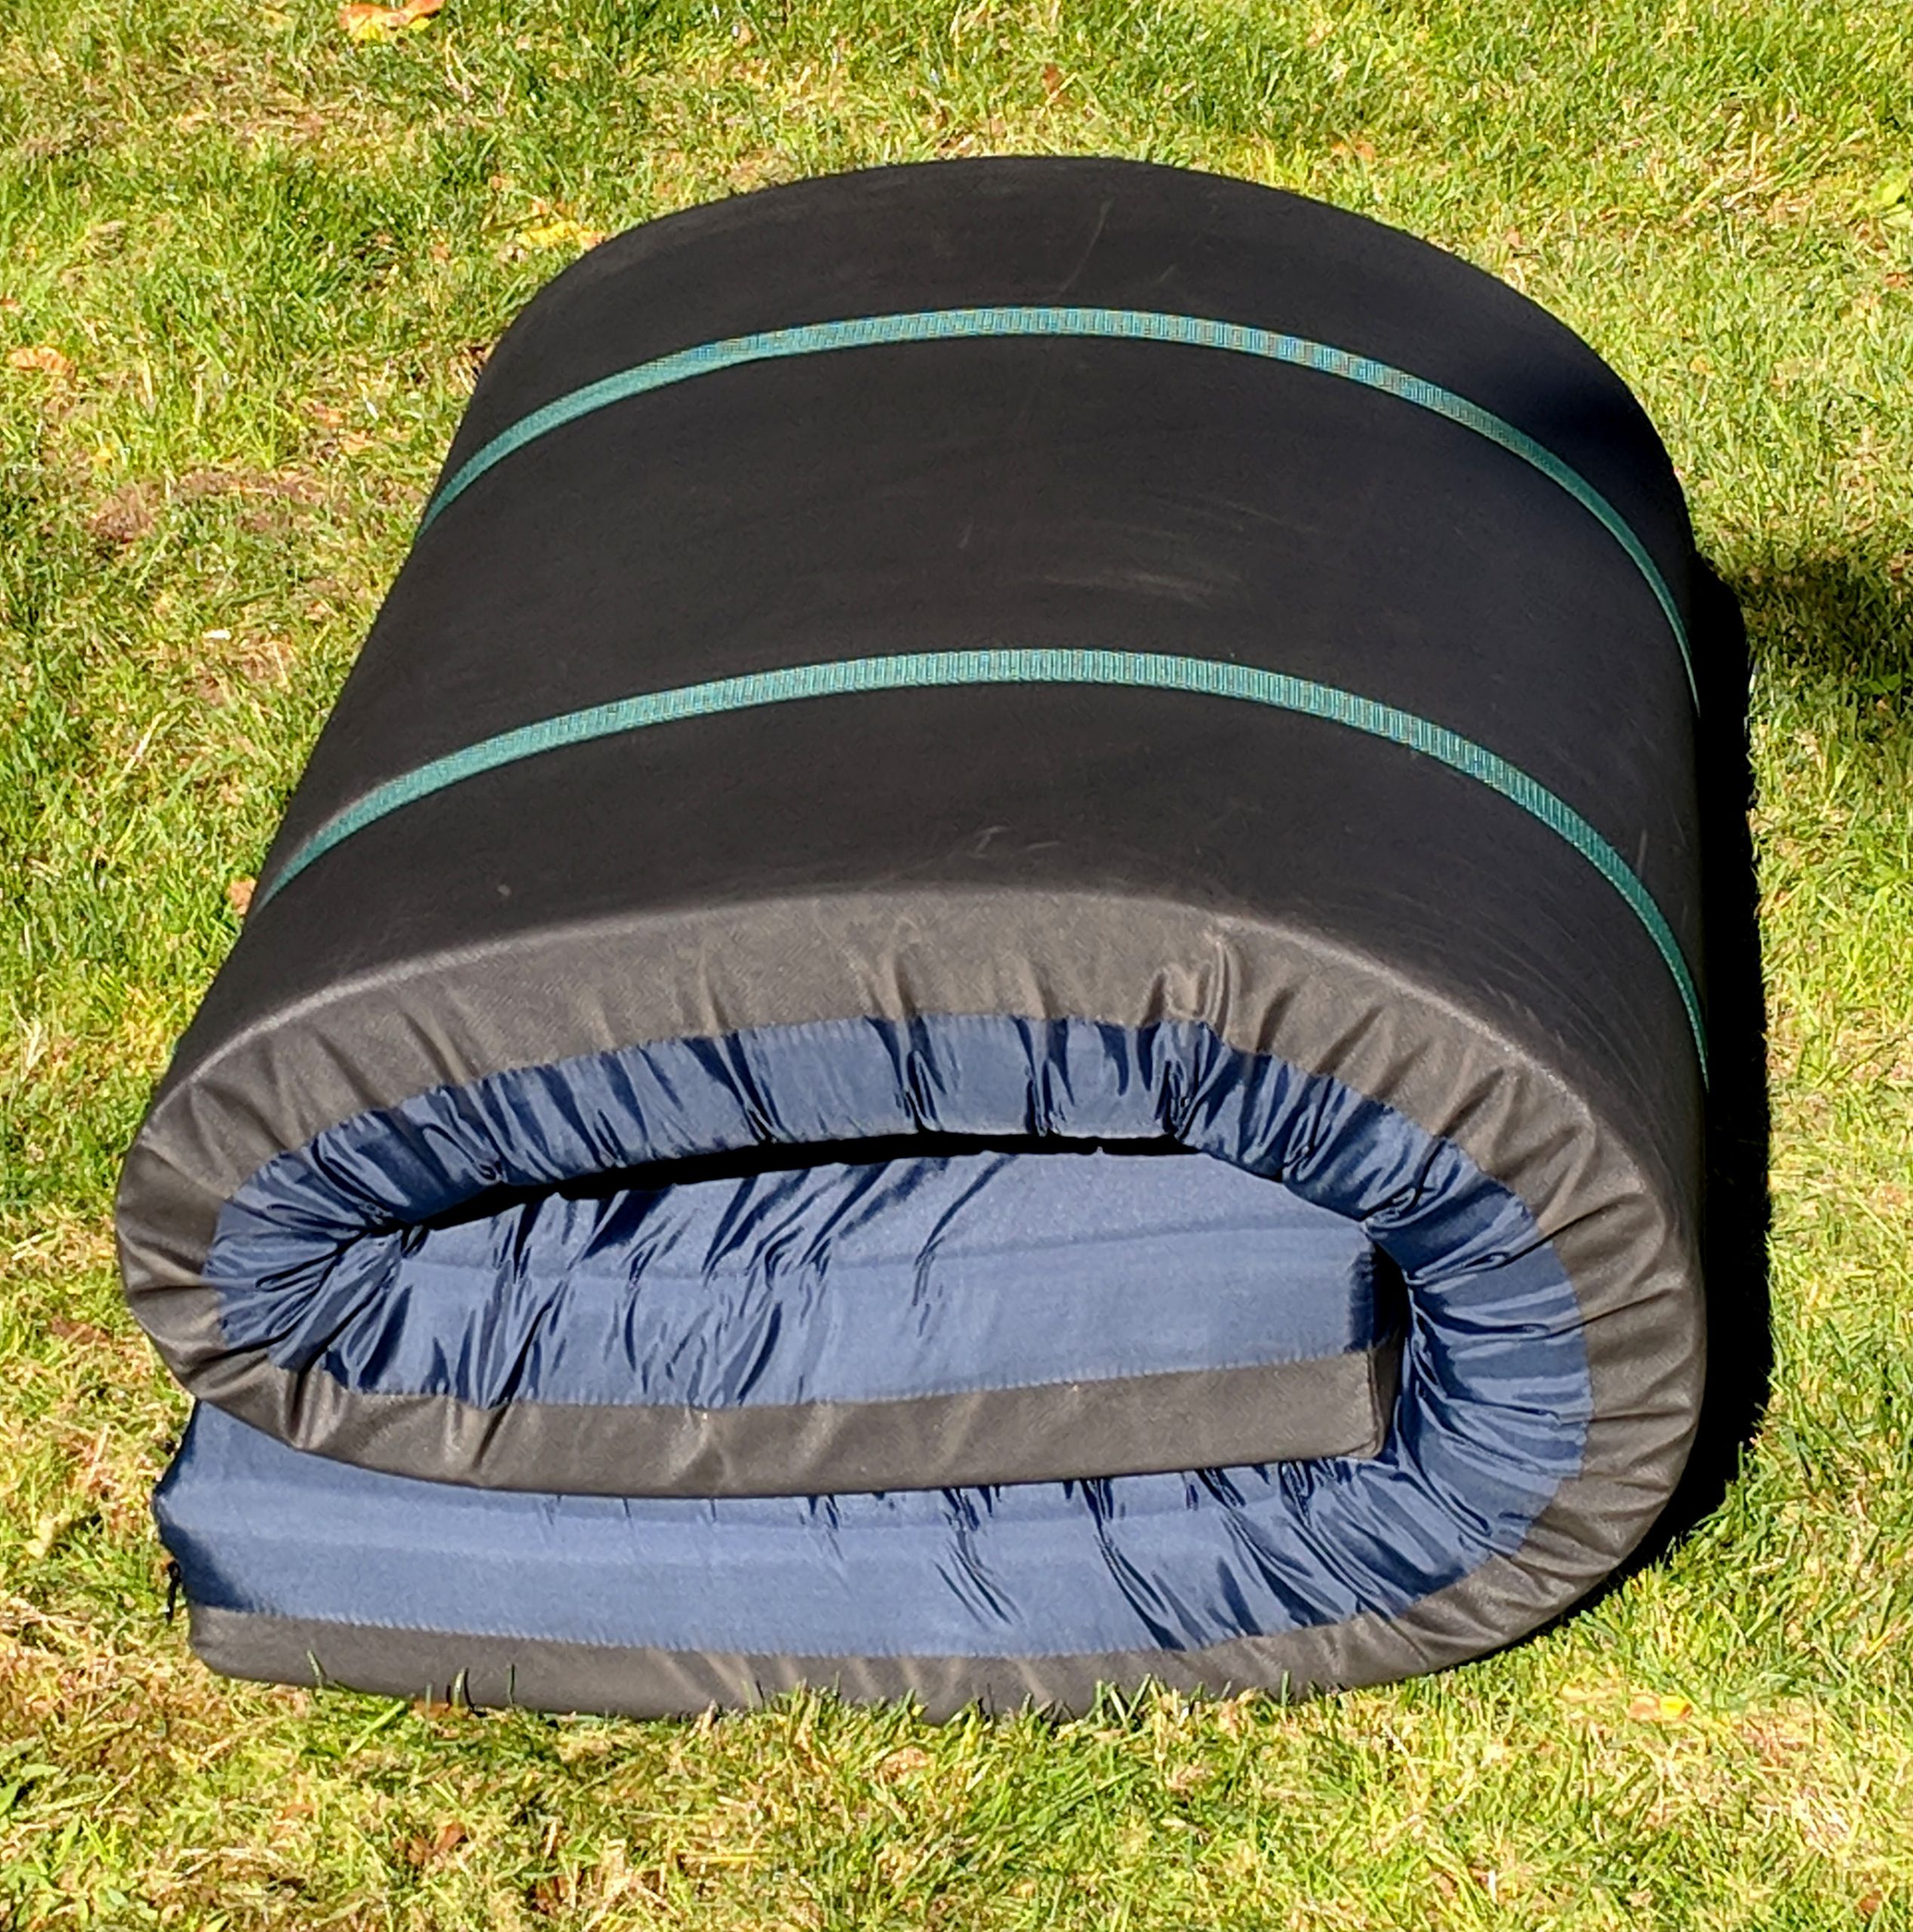 Trapper Lite - Sports Camping Foam Sleep Pad - 4” thick, multiple sizes